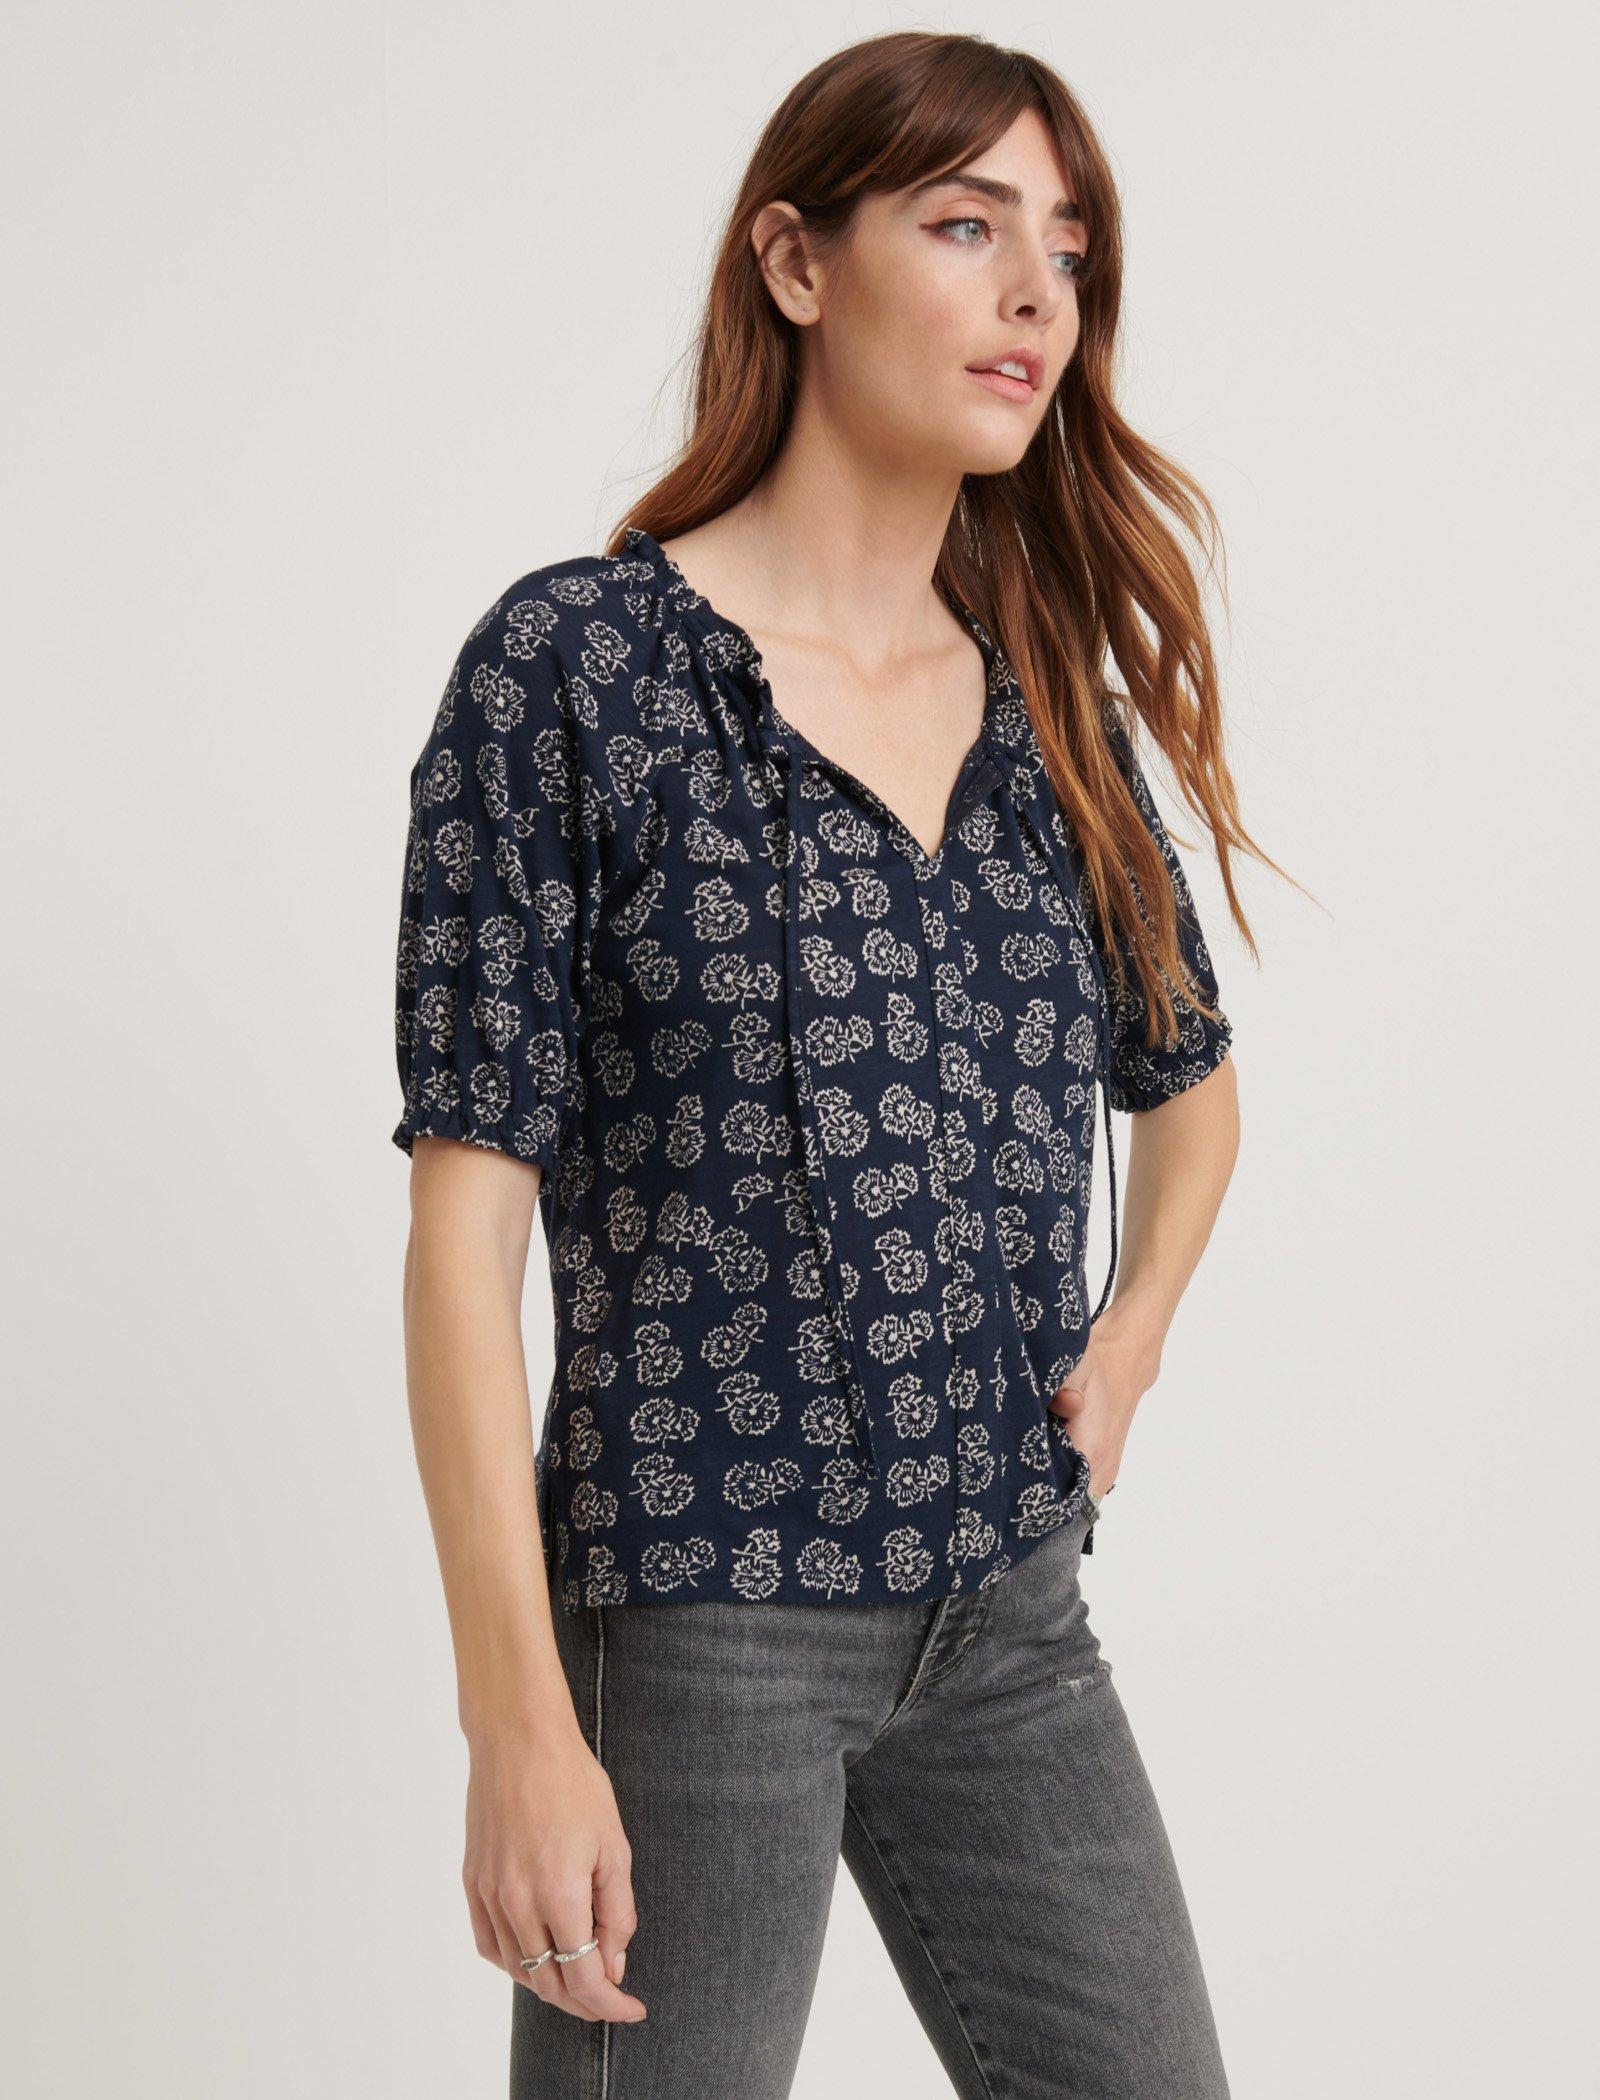 Women's Tops on Sale | Up to 75% Off Sale | Lucky Brand